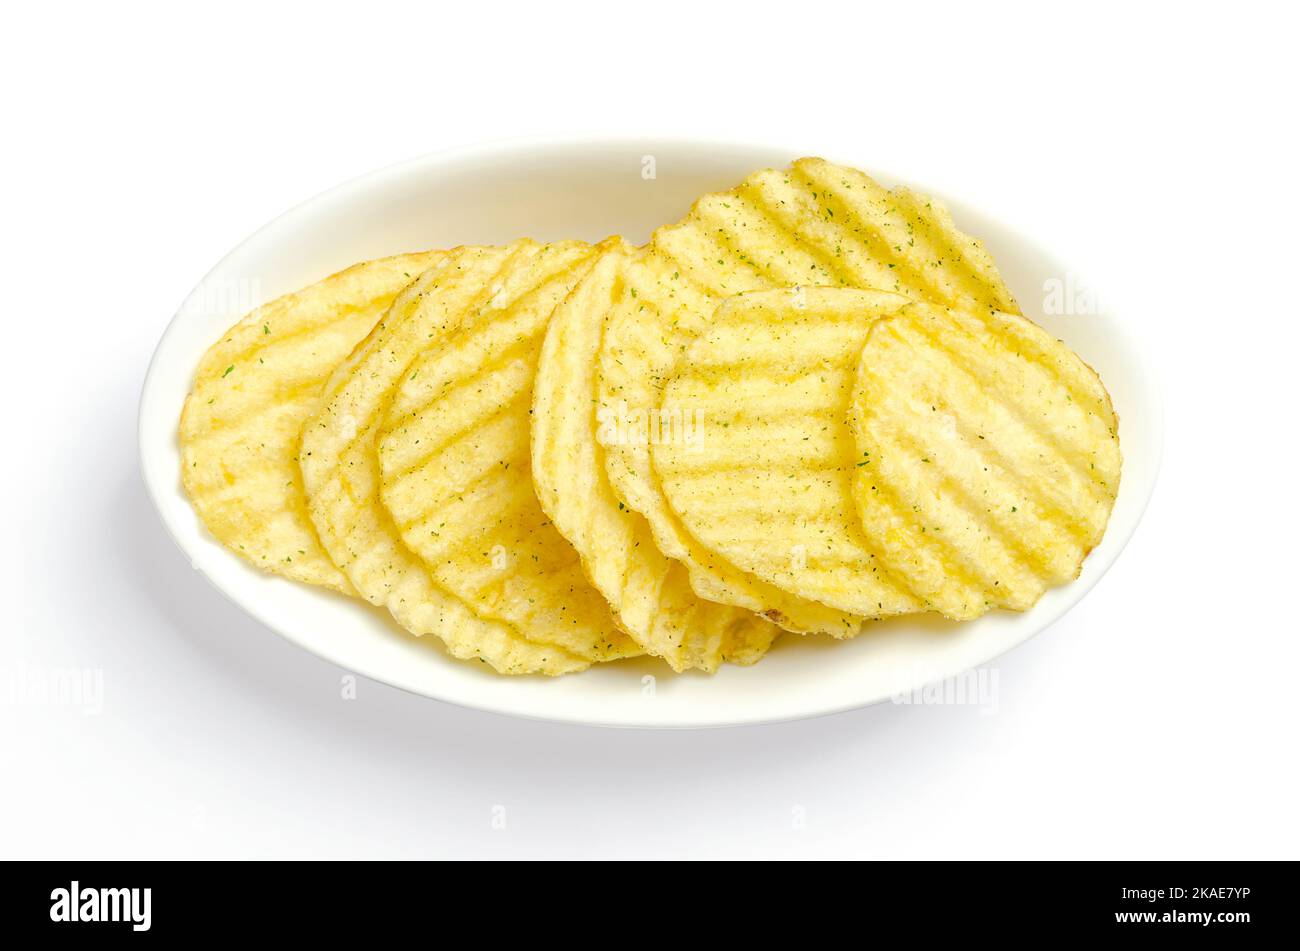 Wasabi and nori flavored salted ruffles, ruffled potato chips, in a white bowl. Crinkle-cut potatoes, deep fried in oil until crunchy. Stock Photo